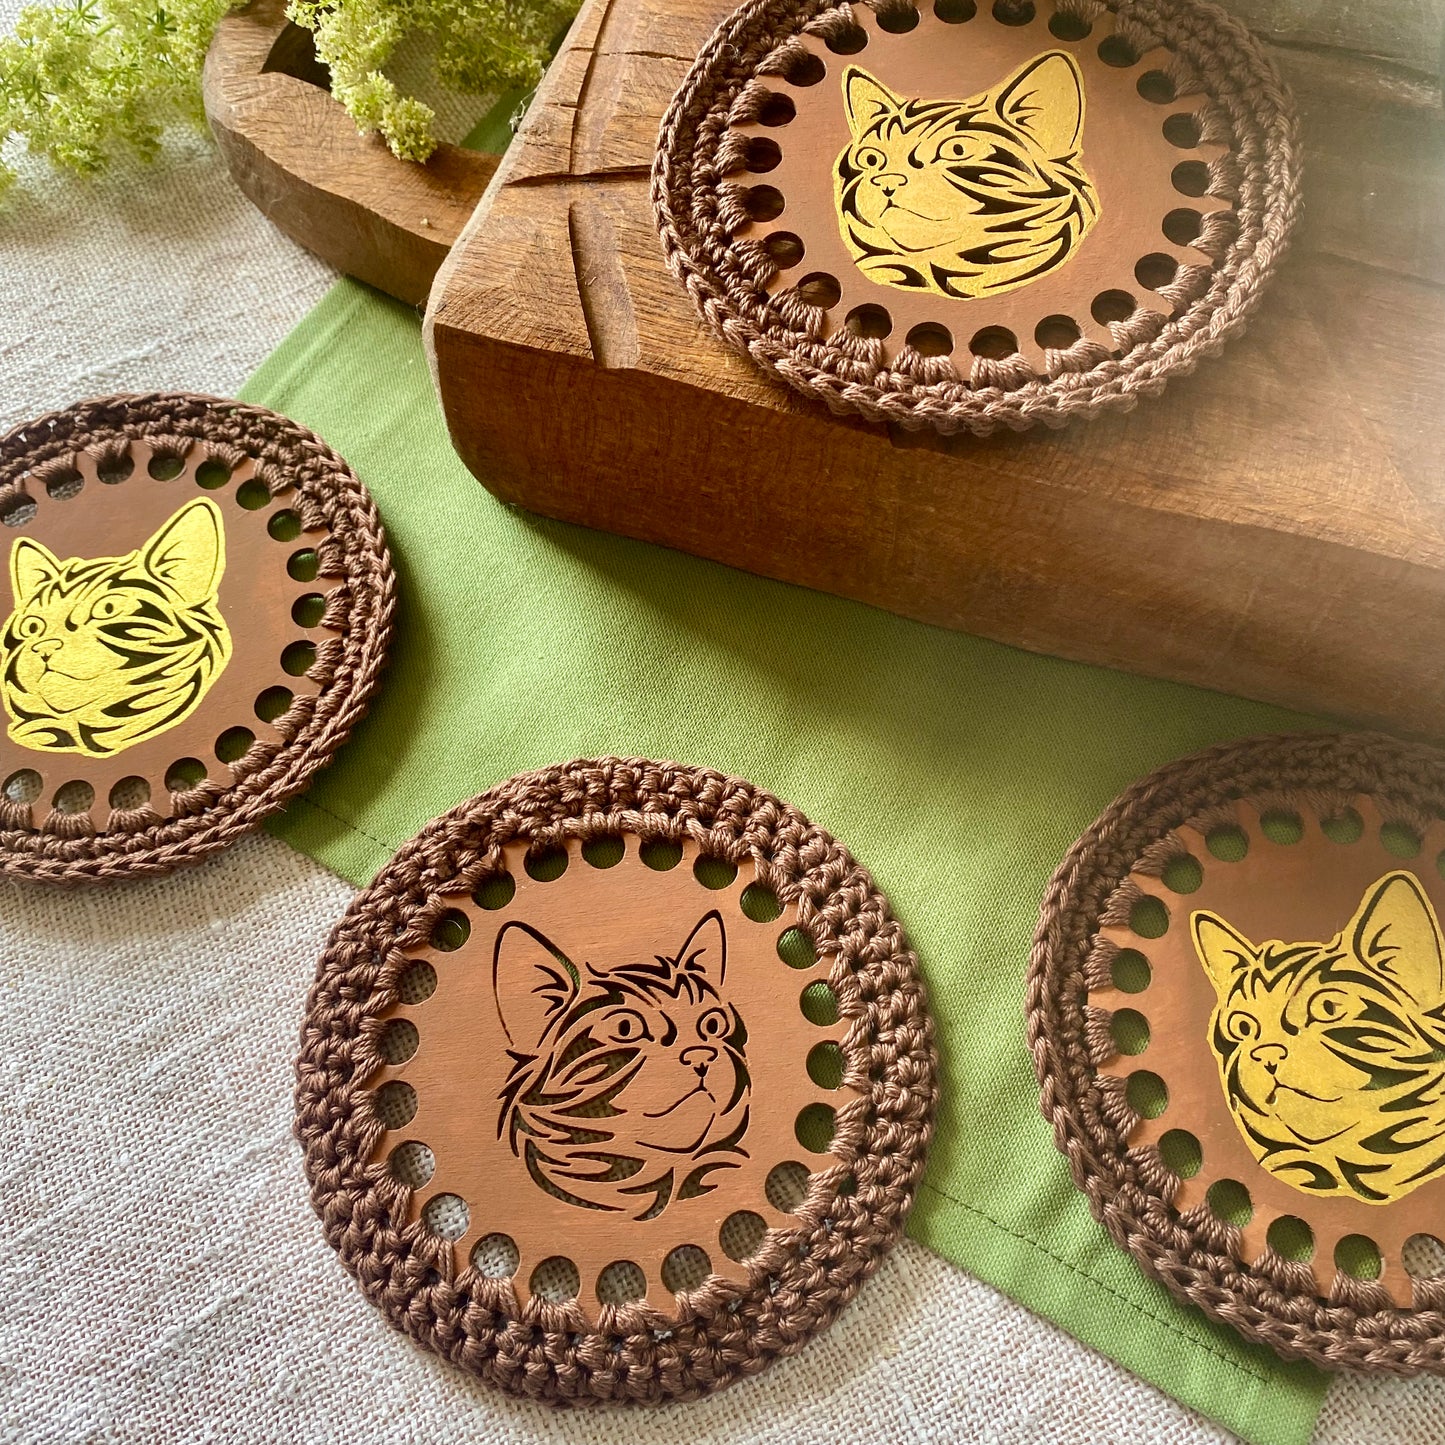 Wooden Gold Cat Coaster - Gift for Cat Lovers - First Home Gift - Kitchen Table Decor - Housewarming Gift - Wedding Gift Idea